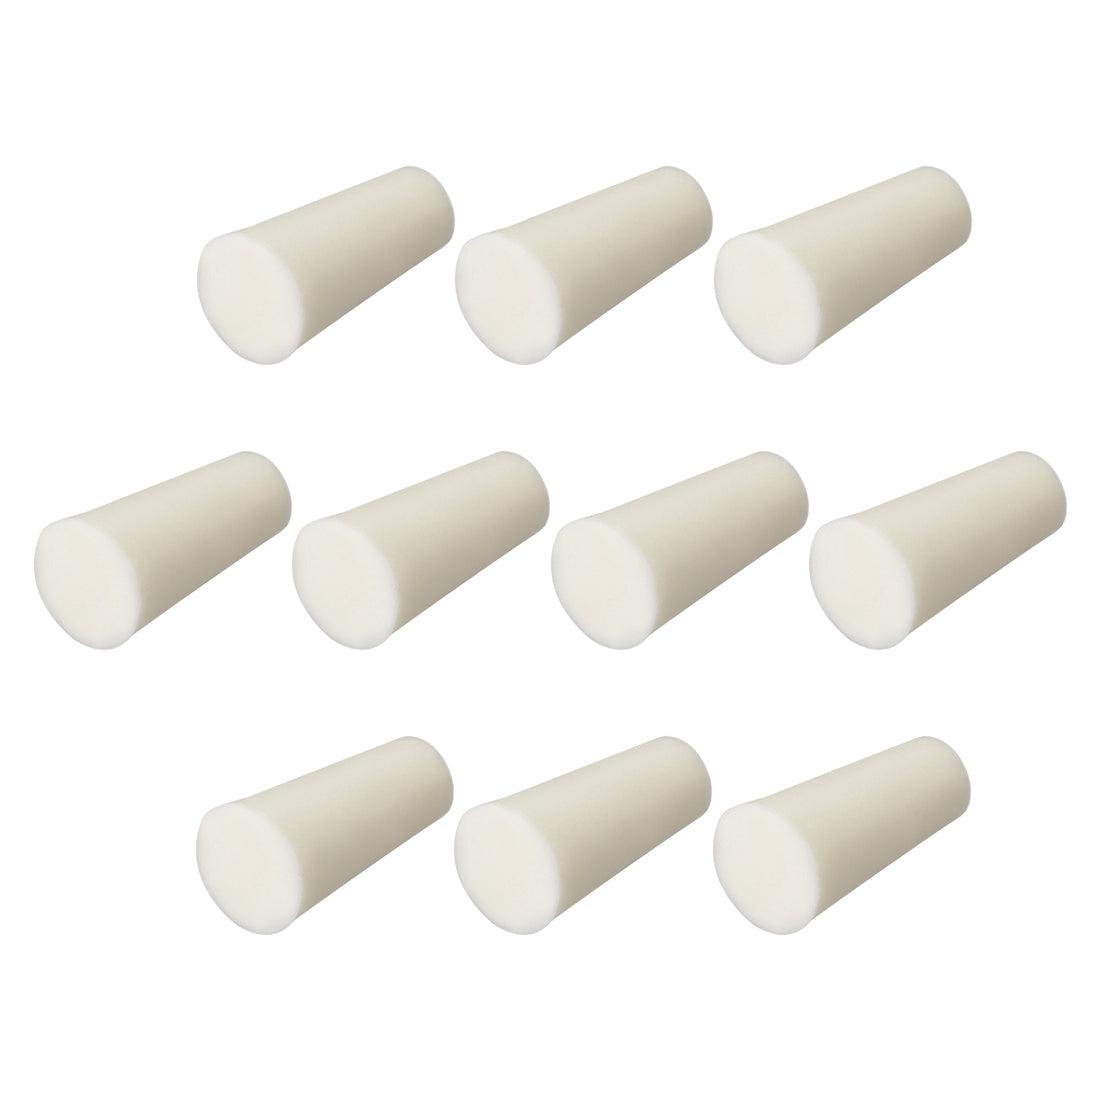 uxcell Uxcell 8-12mm Beige Drilled Silicone Stopper Plugs for Flask Test Tube Stopper 10pcs